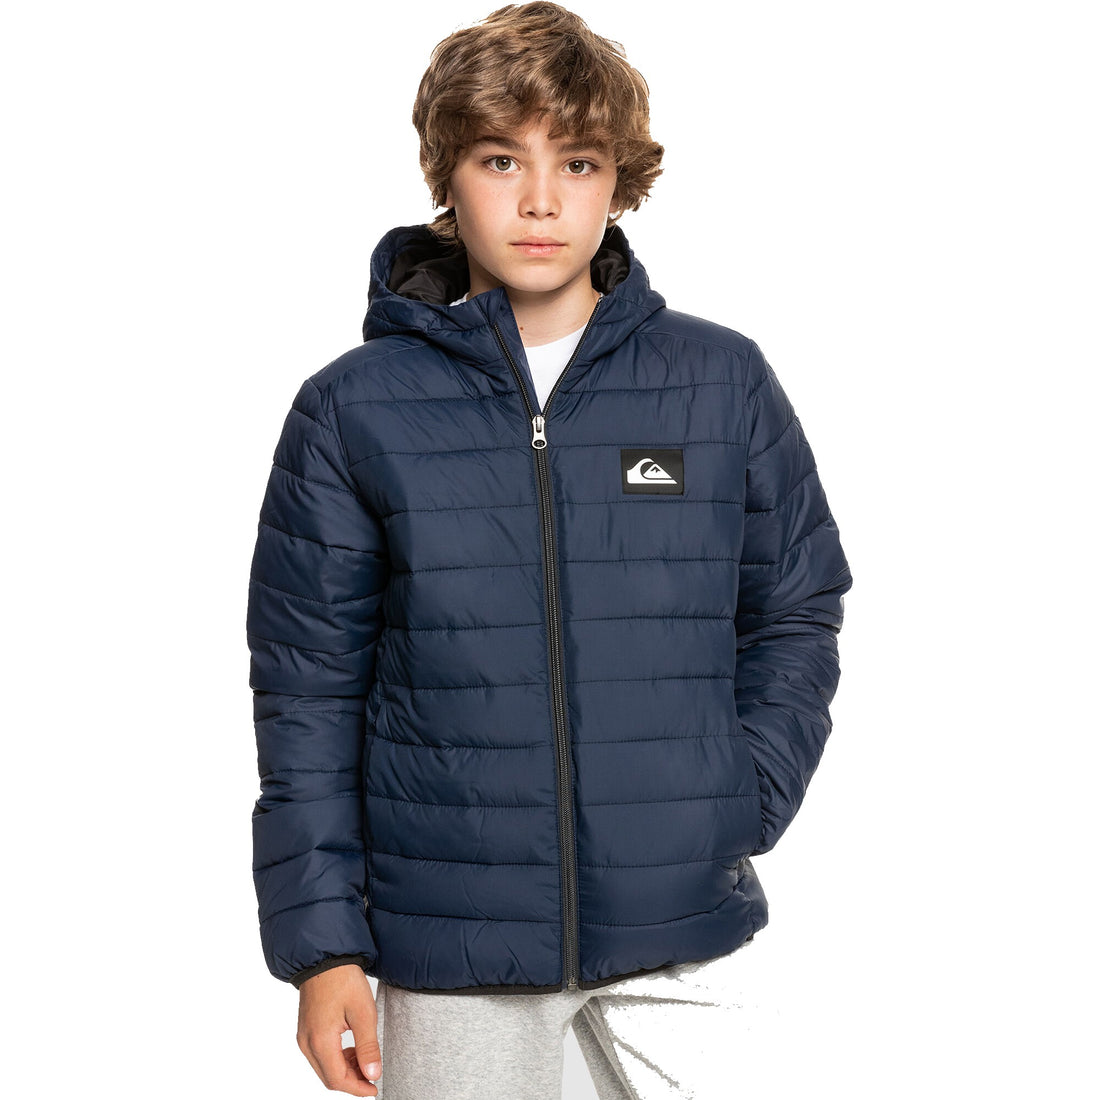 QUIKSILVER SCALY YOUTH JACKET NAVY